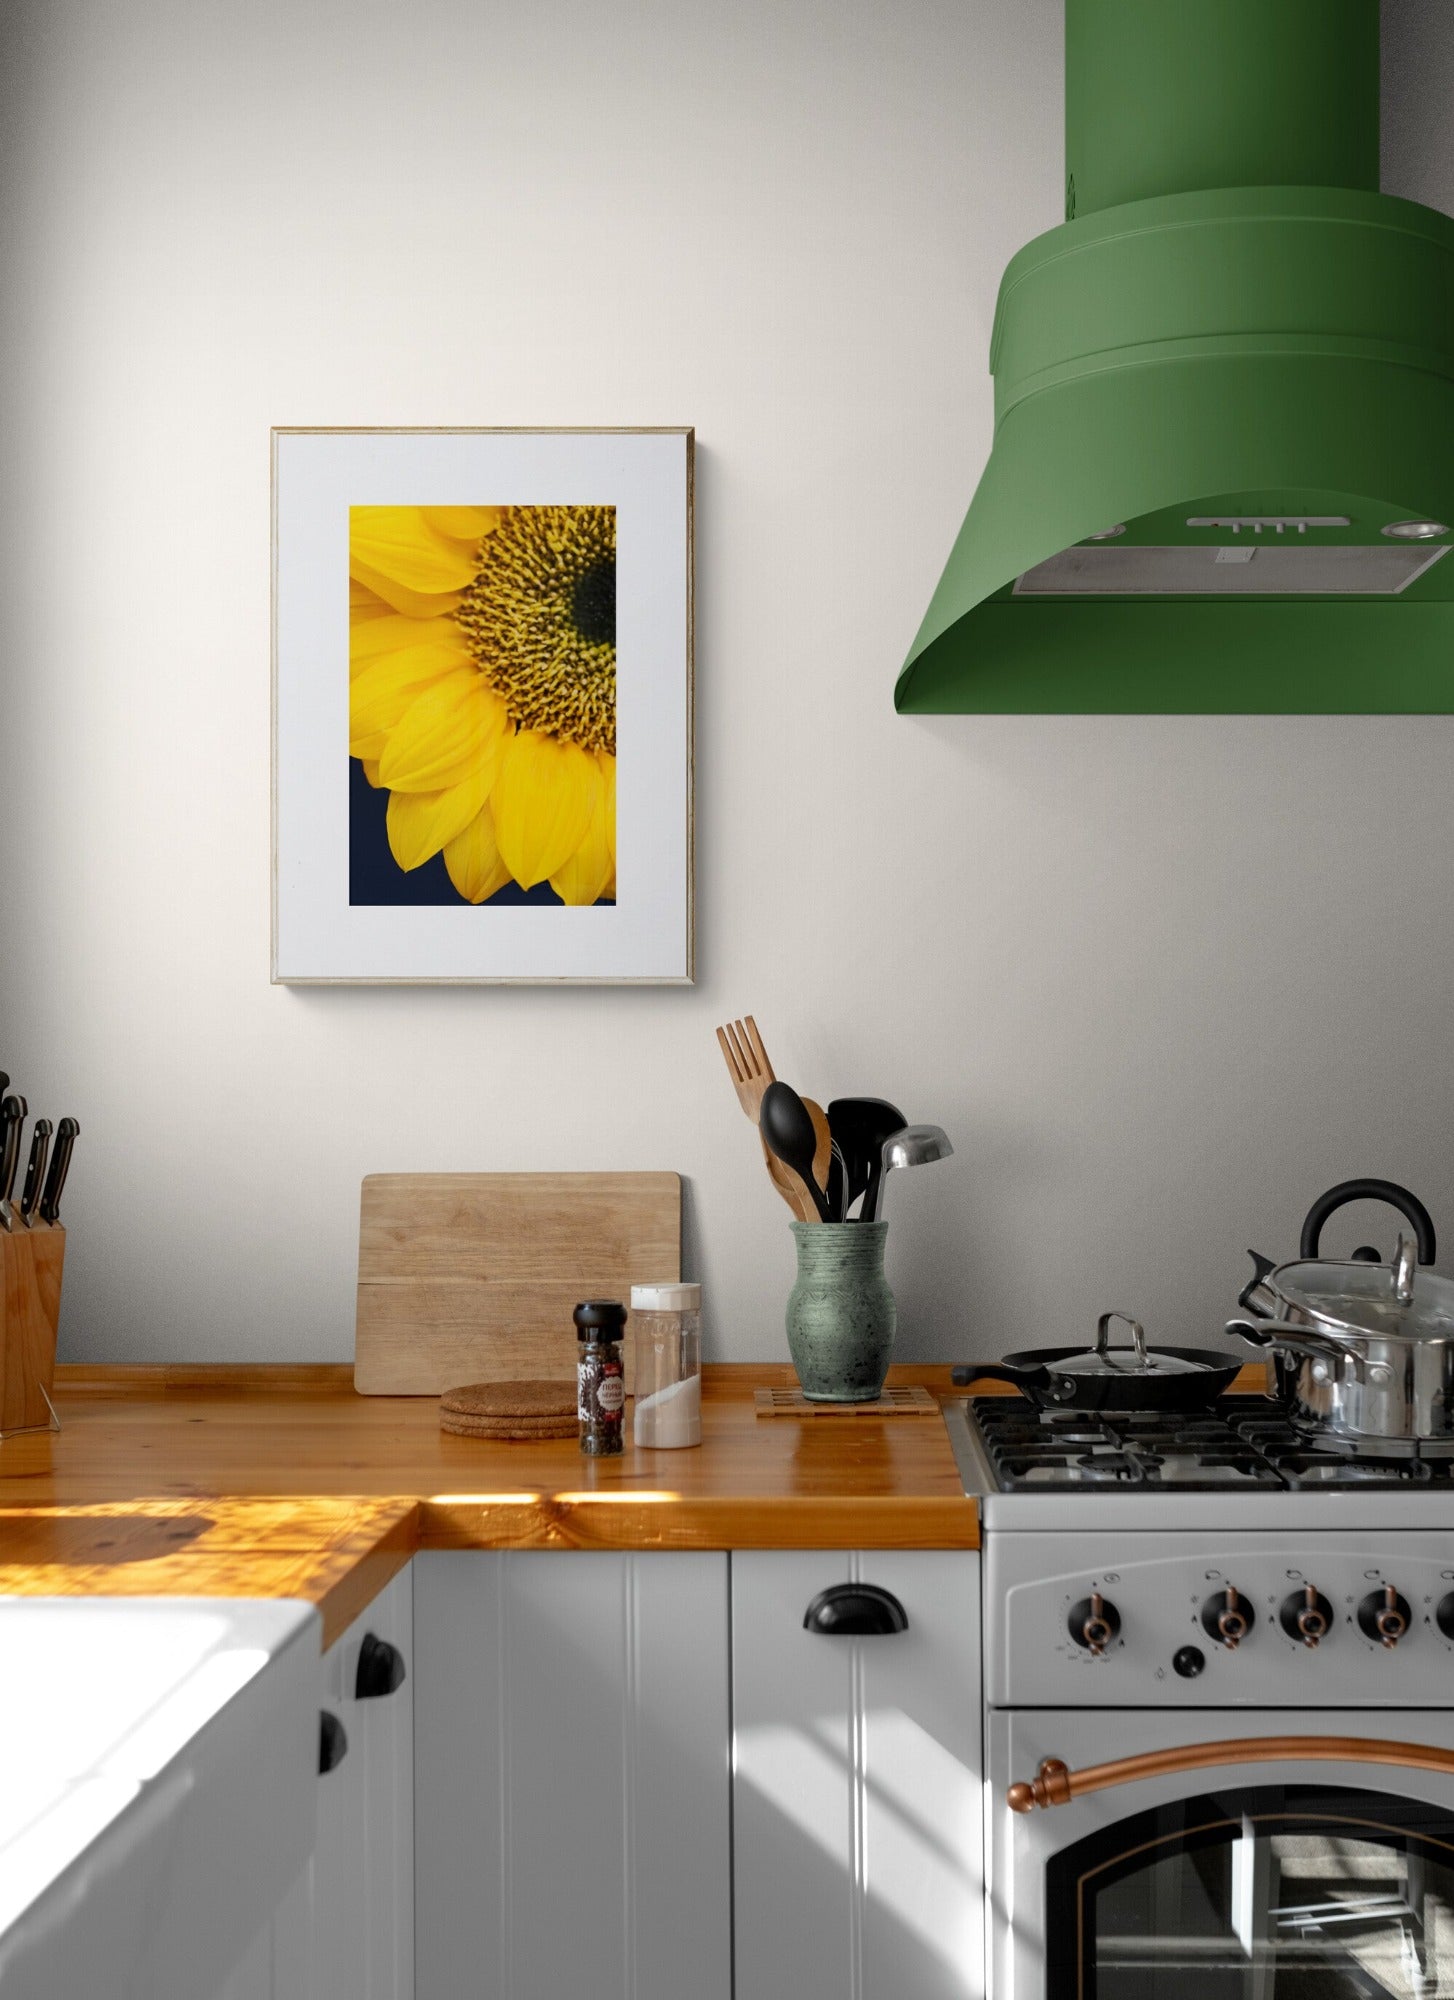 Abstract Close Up Photograph of a Sunflower as Wall Art in a Kitchen